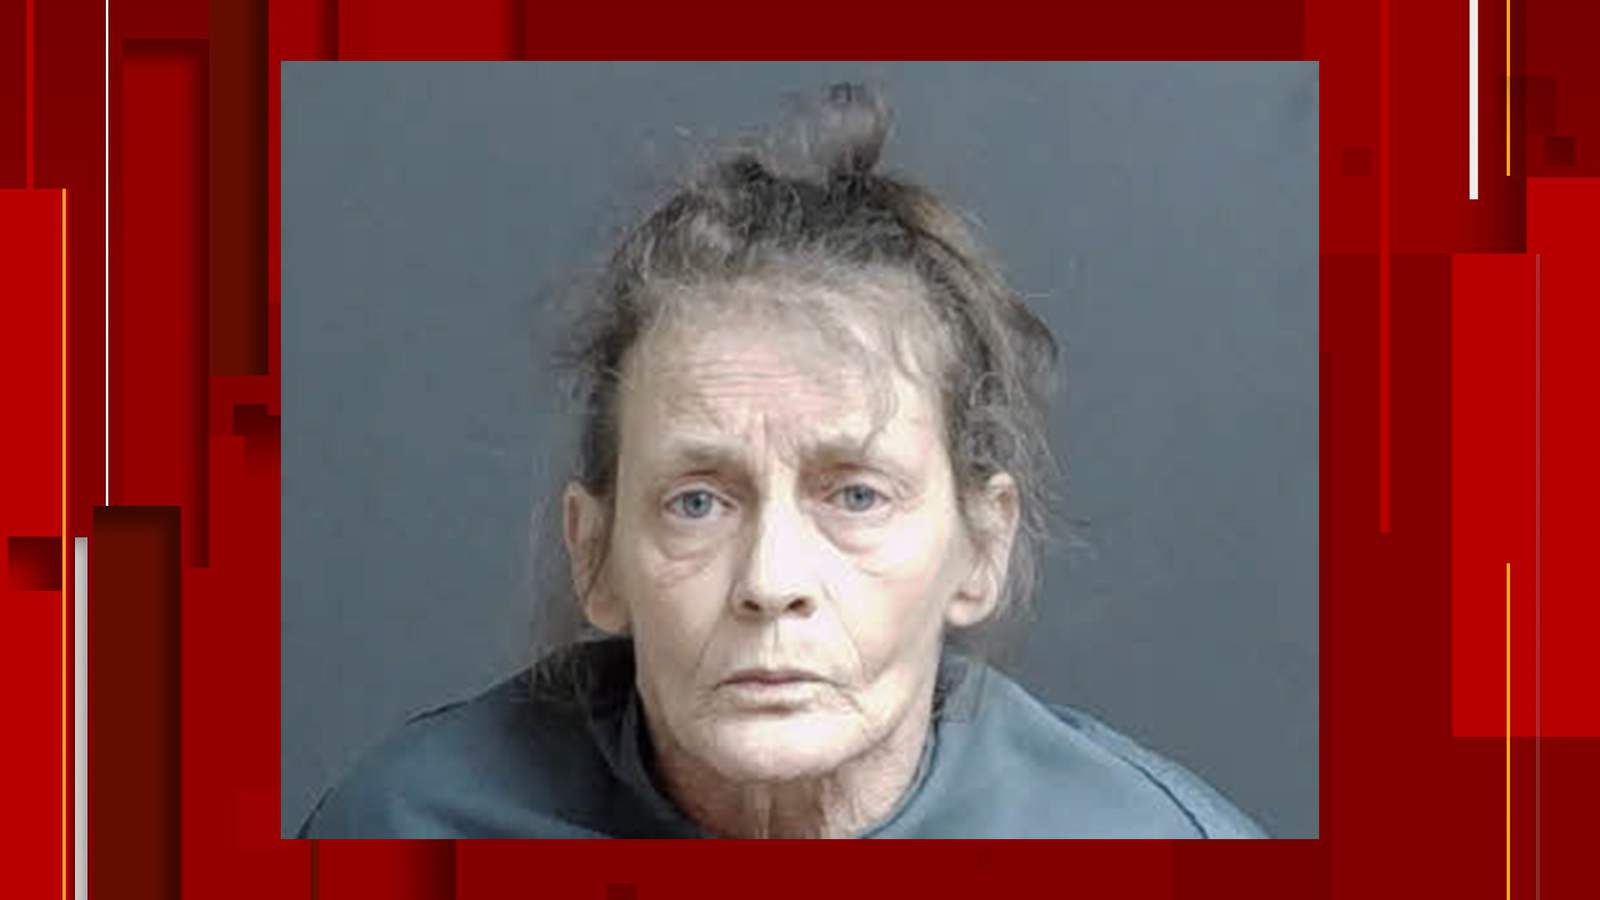 59-year-old woman arrested for second-degree murder in Franklin County